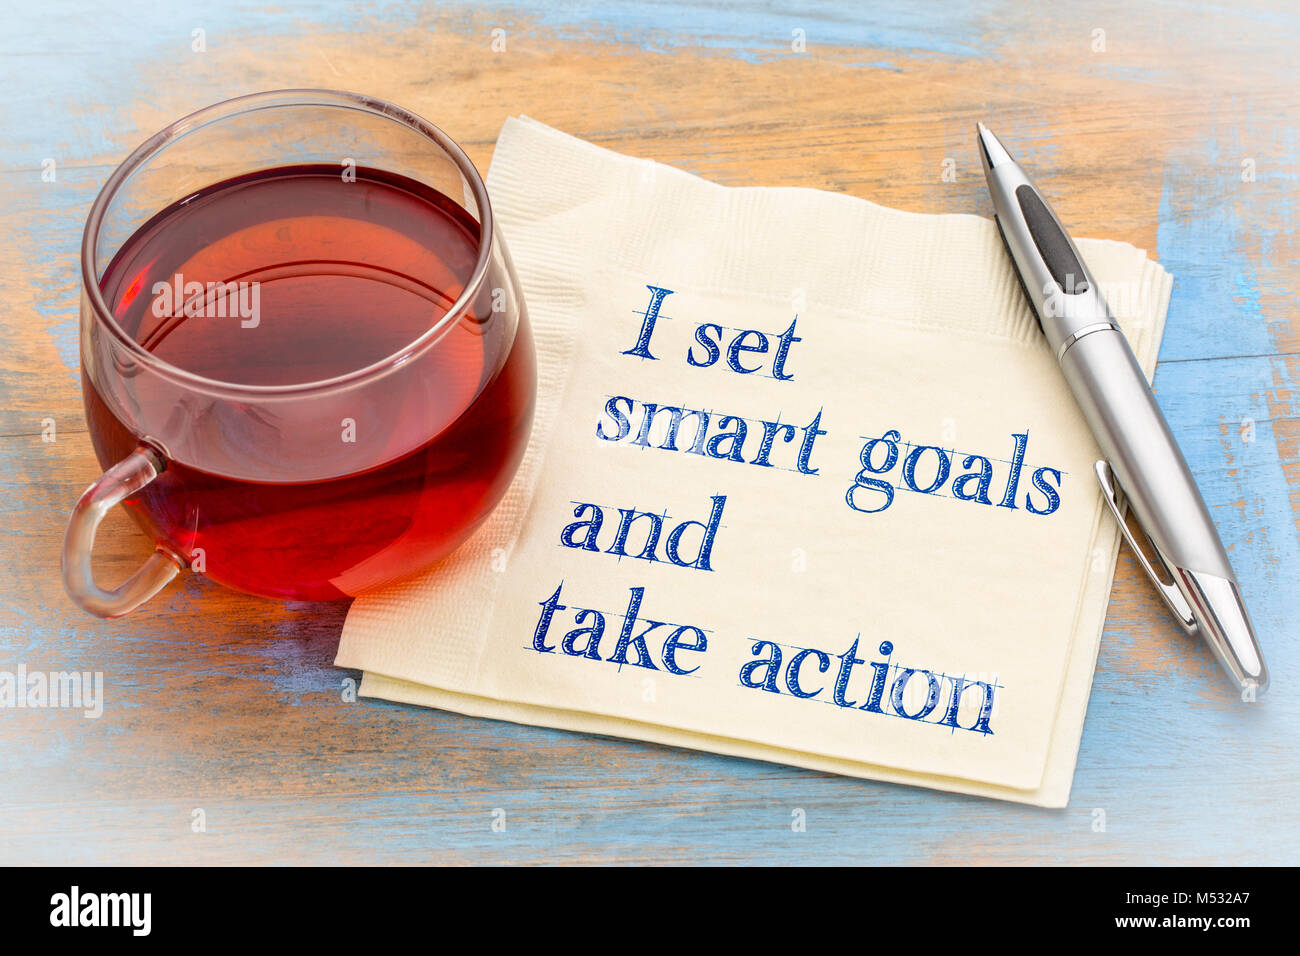 I set smart goals and take action - positive handwriting on a anapkin with a cup of tea Stock Photo